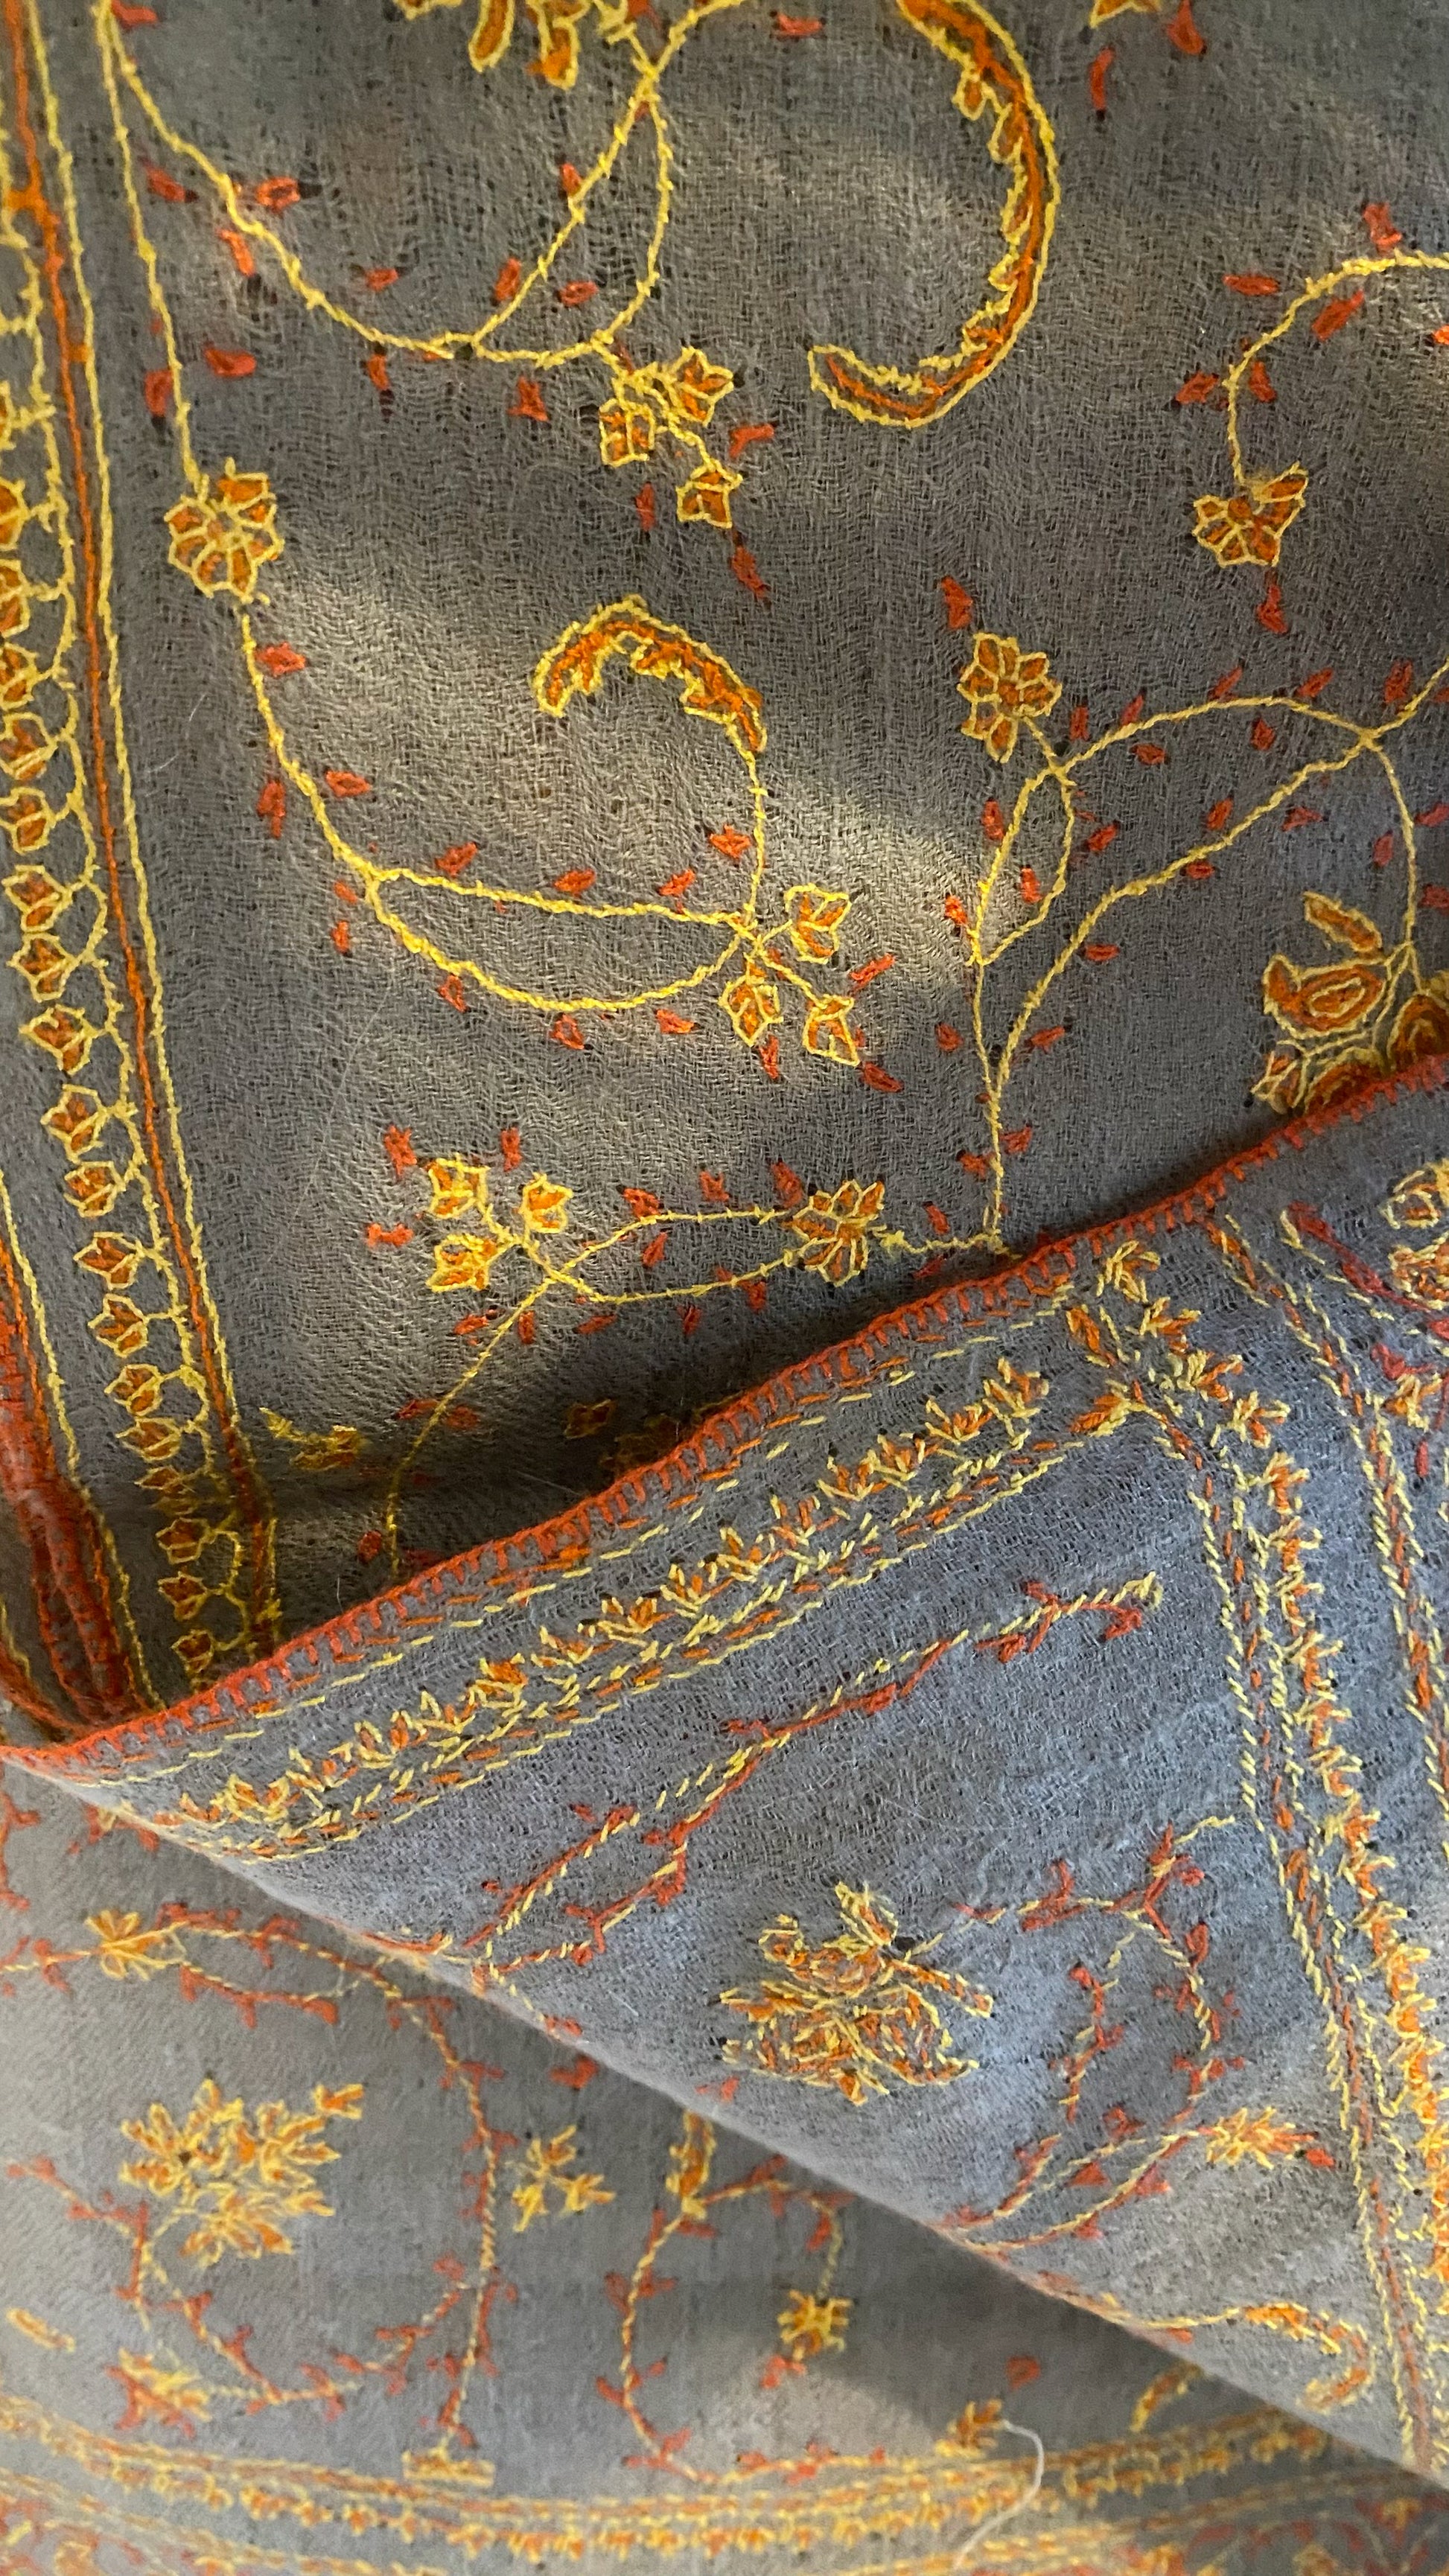 Laal's Pashmina Jaalidar Stole with Embroidery. At 70x200 cm and a mere 120 grams, it epitomizes luxury in every fiber. The stole, woven from the rare Yangir wool of the Himalayan Ibex, promises unparalleled softness.